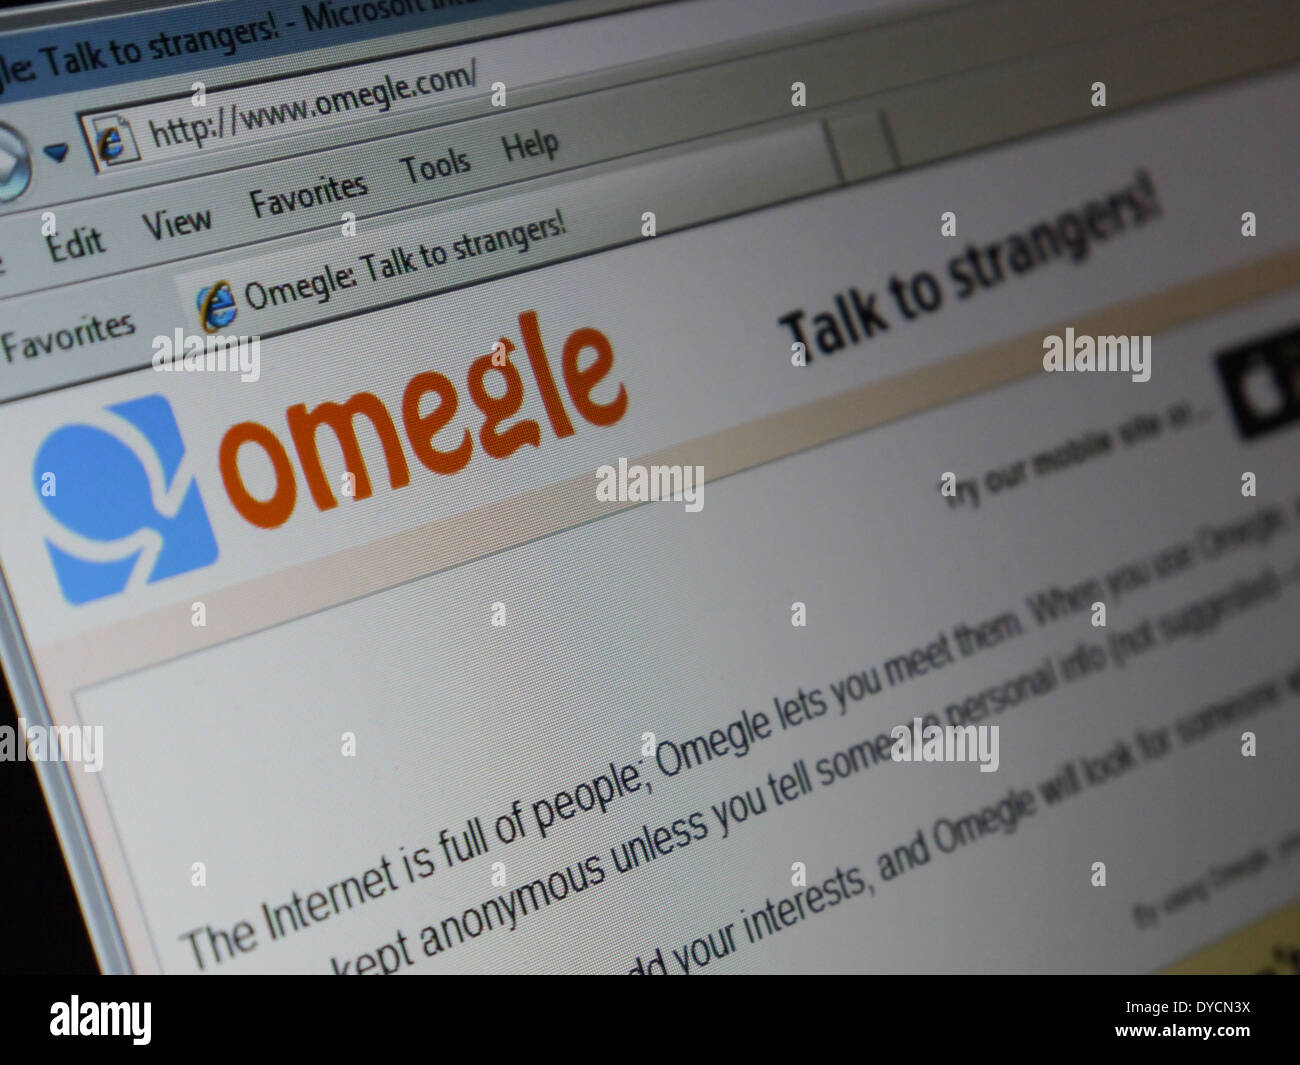 Omegle Online Chat Room Website Stock Photo Royalty Free Image